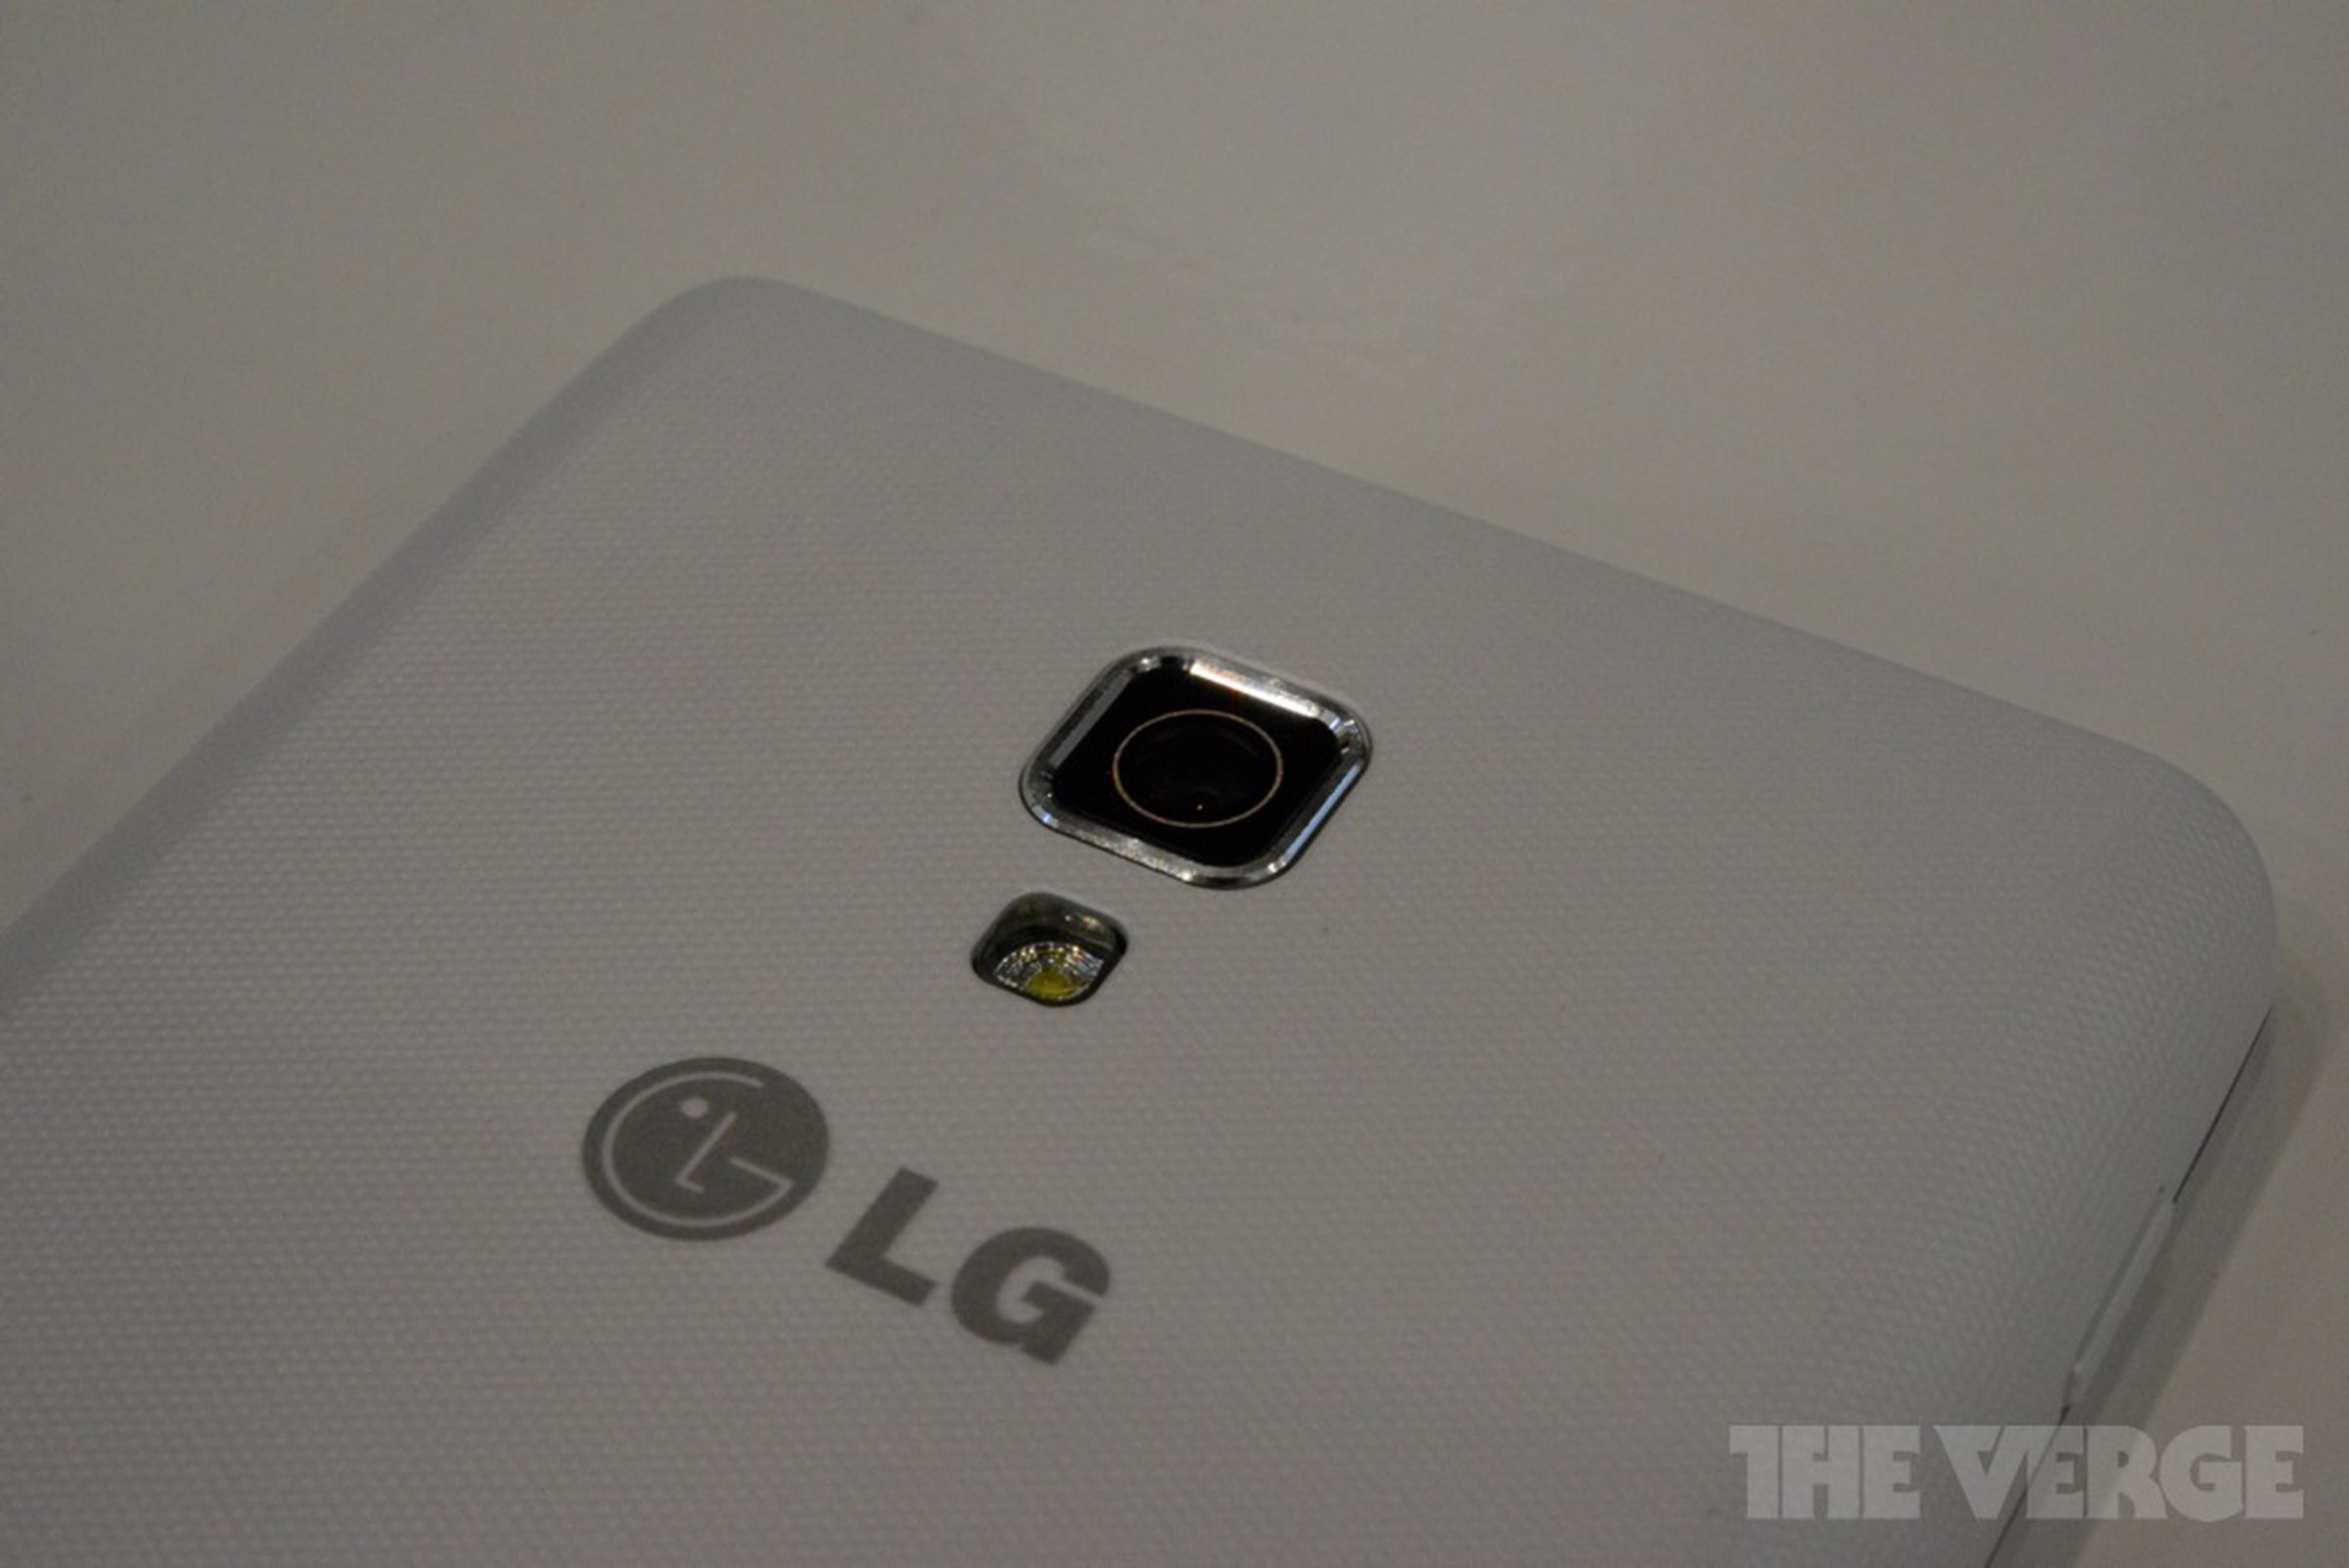 LG Optimus L7 II hands-on pictures